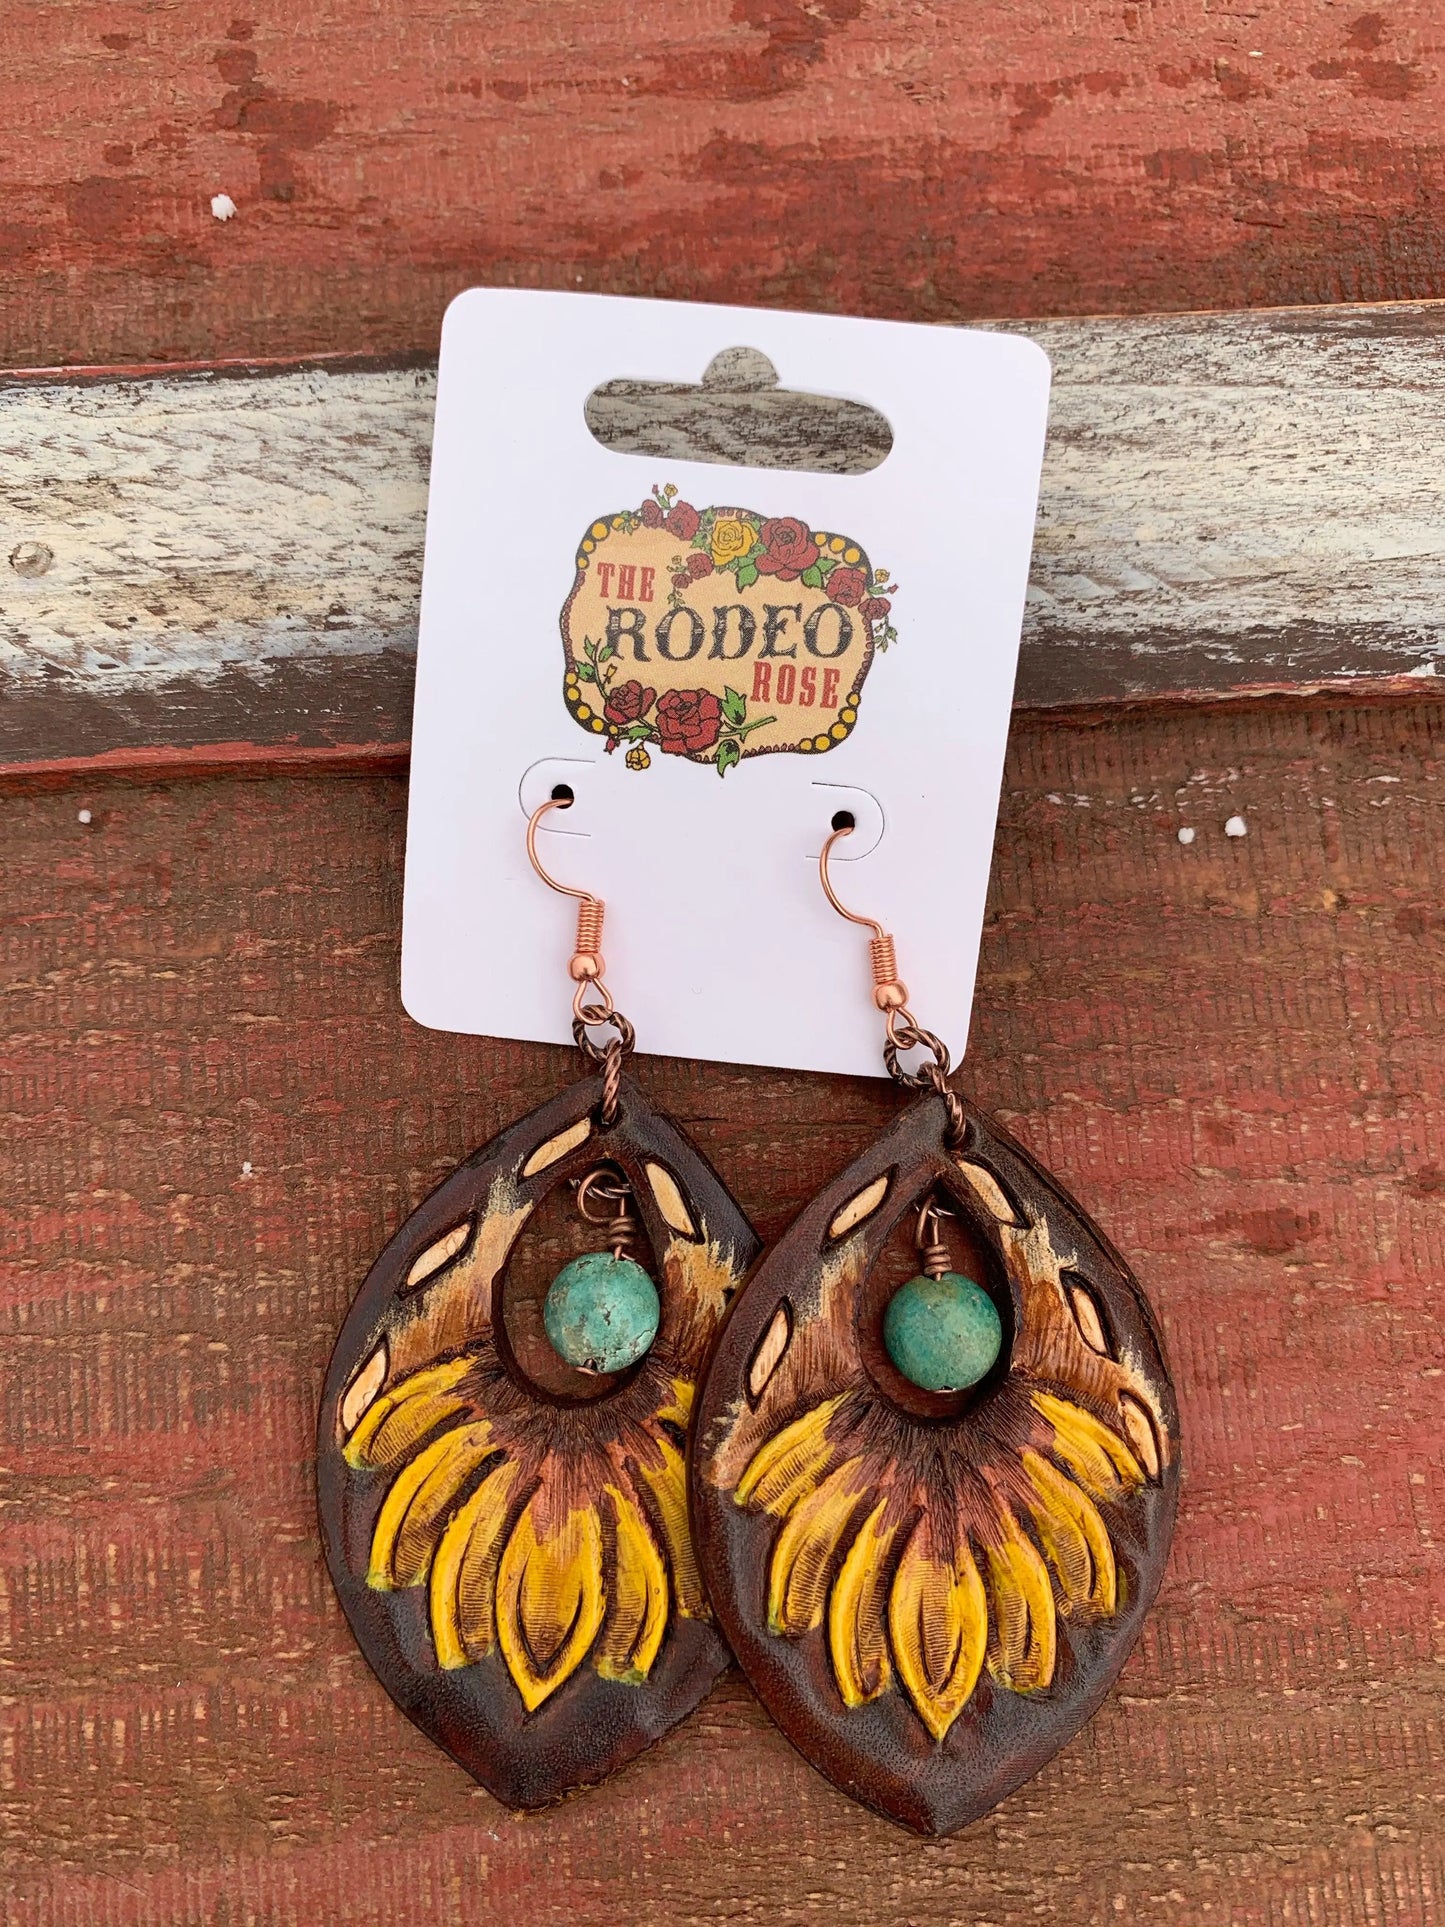 The Dale Hand tooled Leather Earrings with White Buckstitch and Turquoise Beads The Rodeo Rose